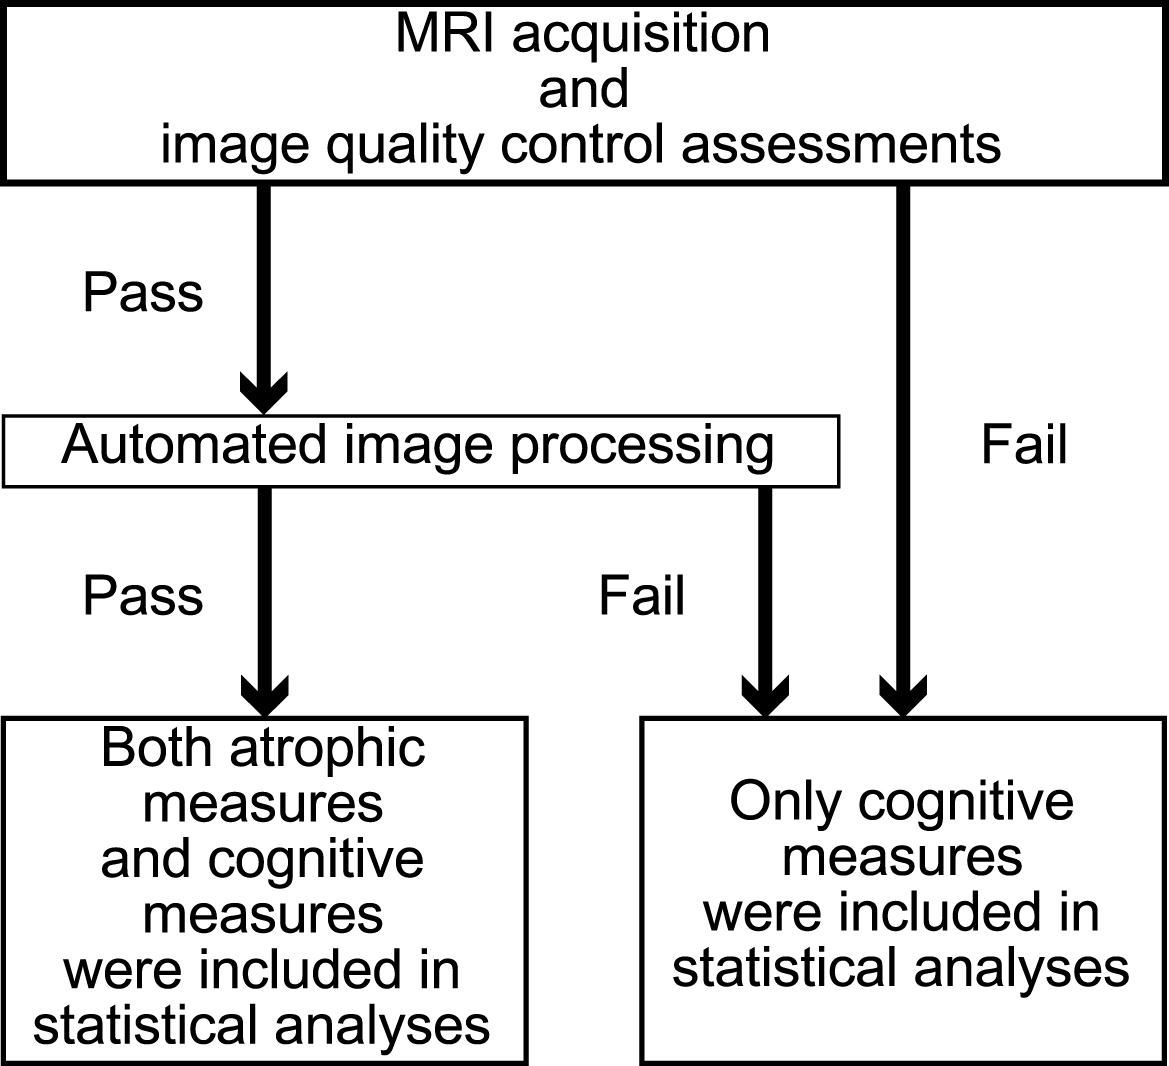 Flow diagram showing the inclusion and exclusion of atrophy measures and cognitive measures in the statistical analyses.